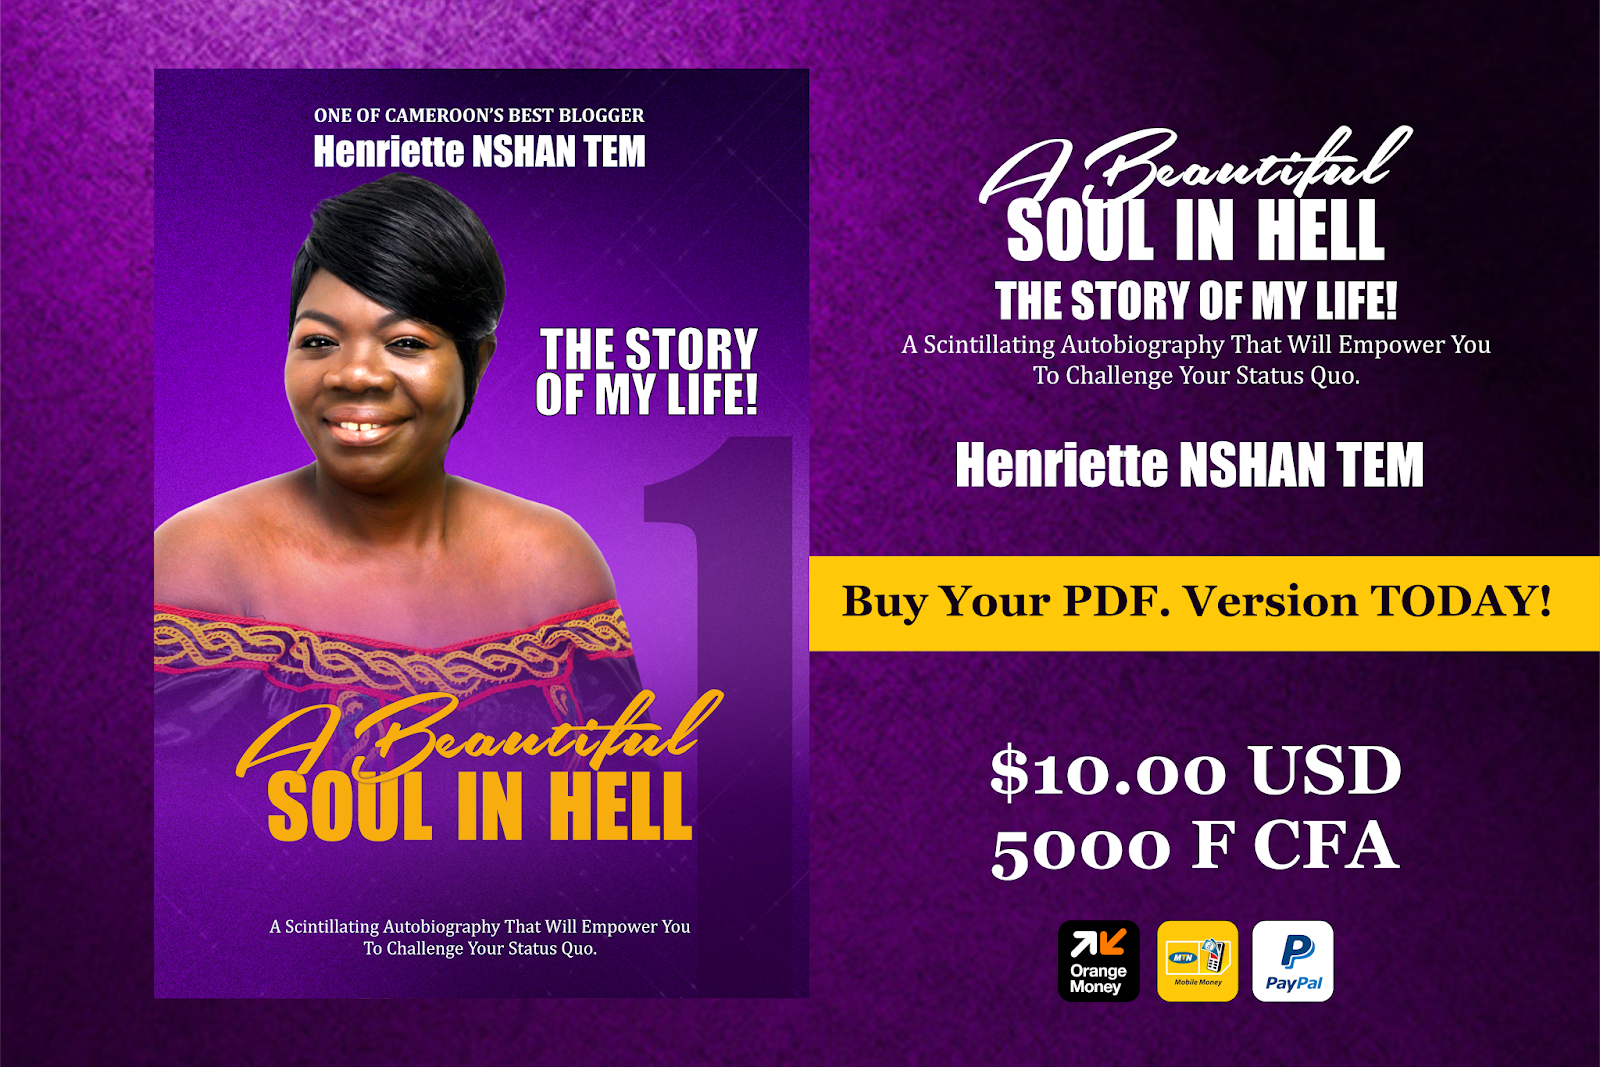 A Beautiful Soul In Hell – The Story Of My Life (Henriette NSHAN TEM)